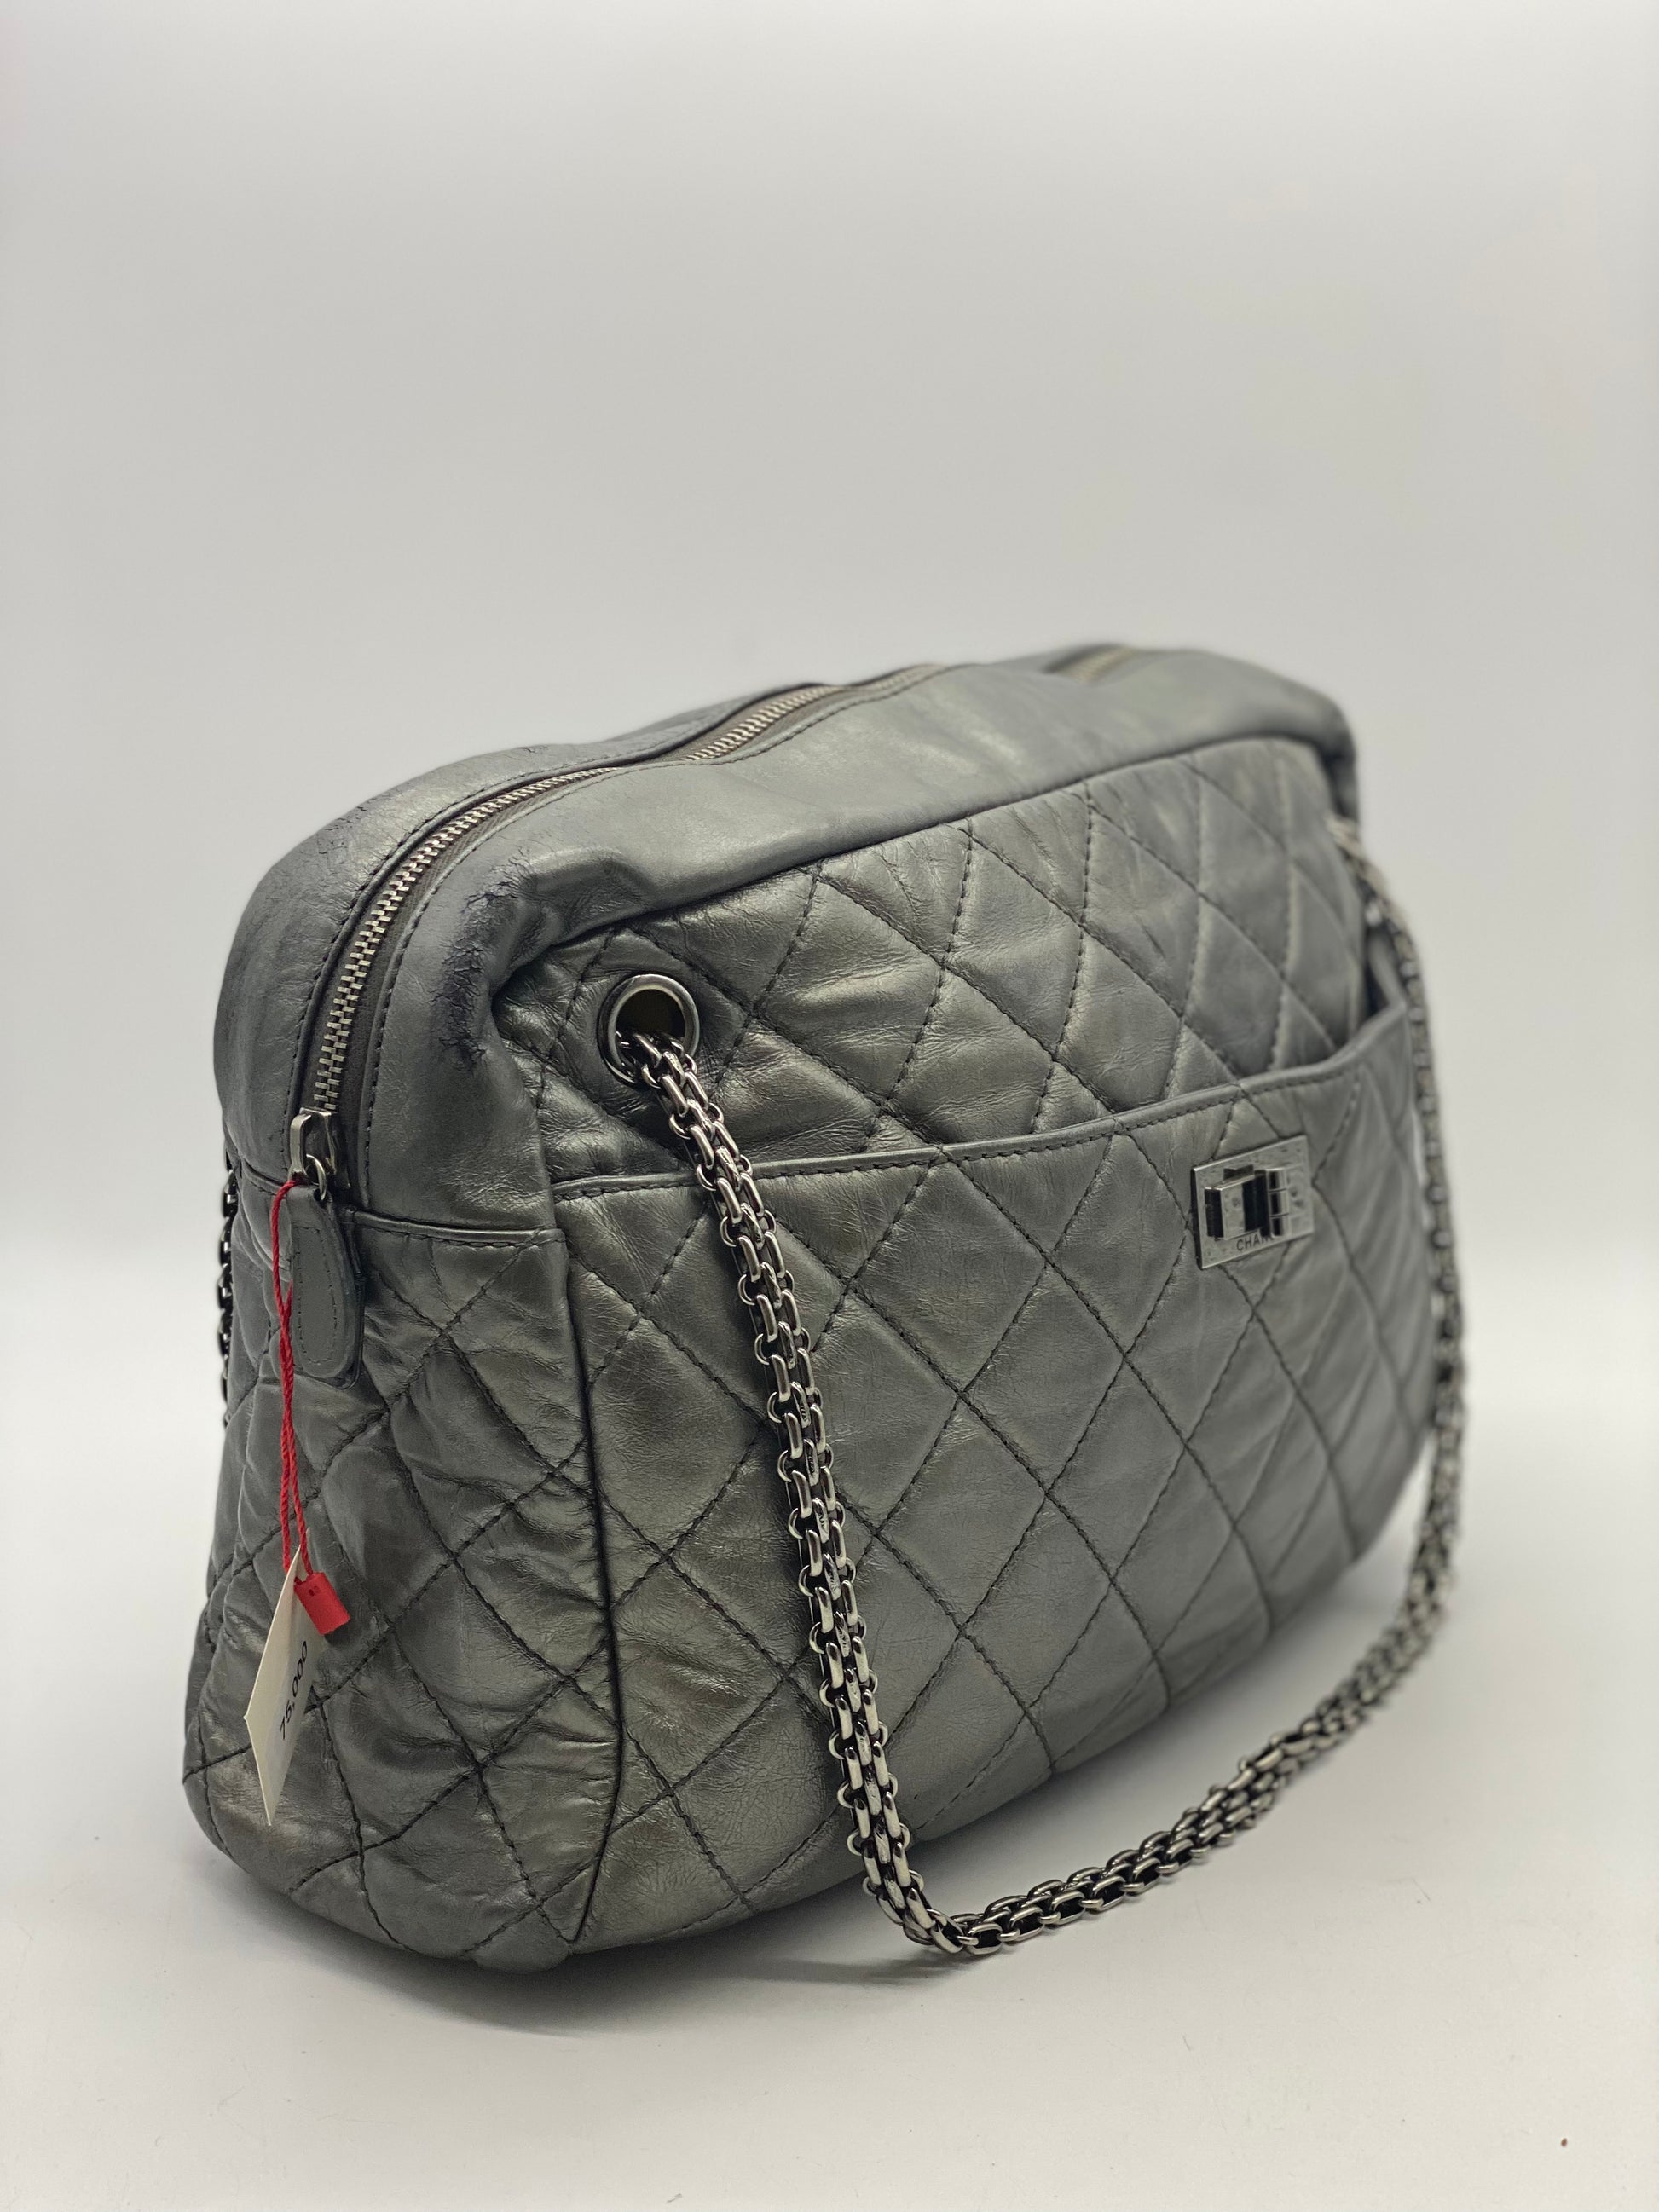 Chanel Reissue Camera Bag Quilted Aged Calfskin Large Silver